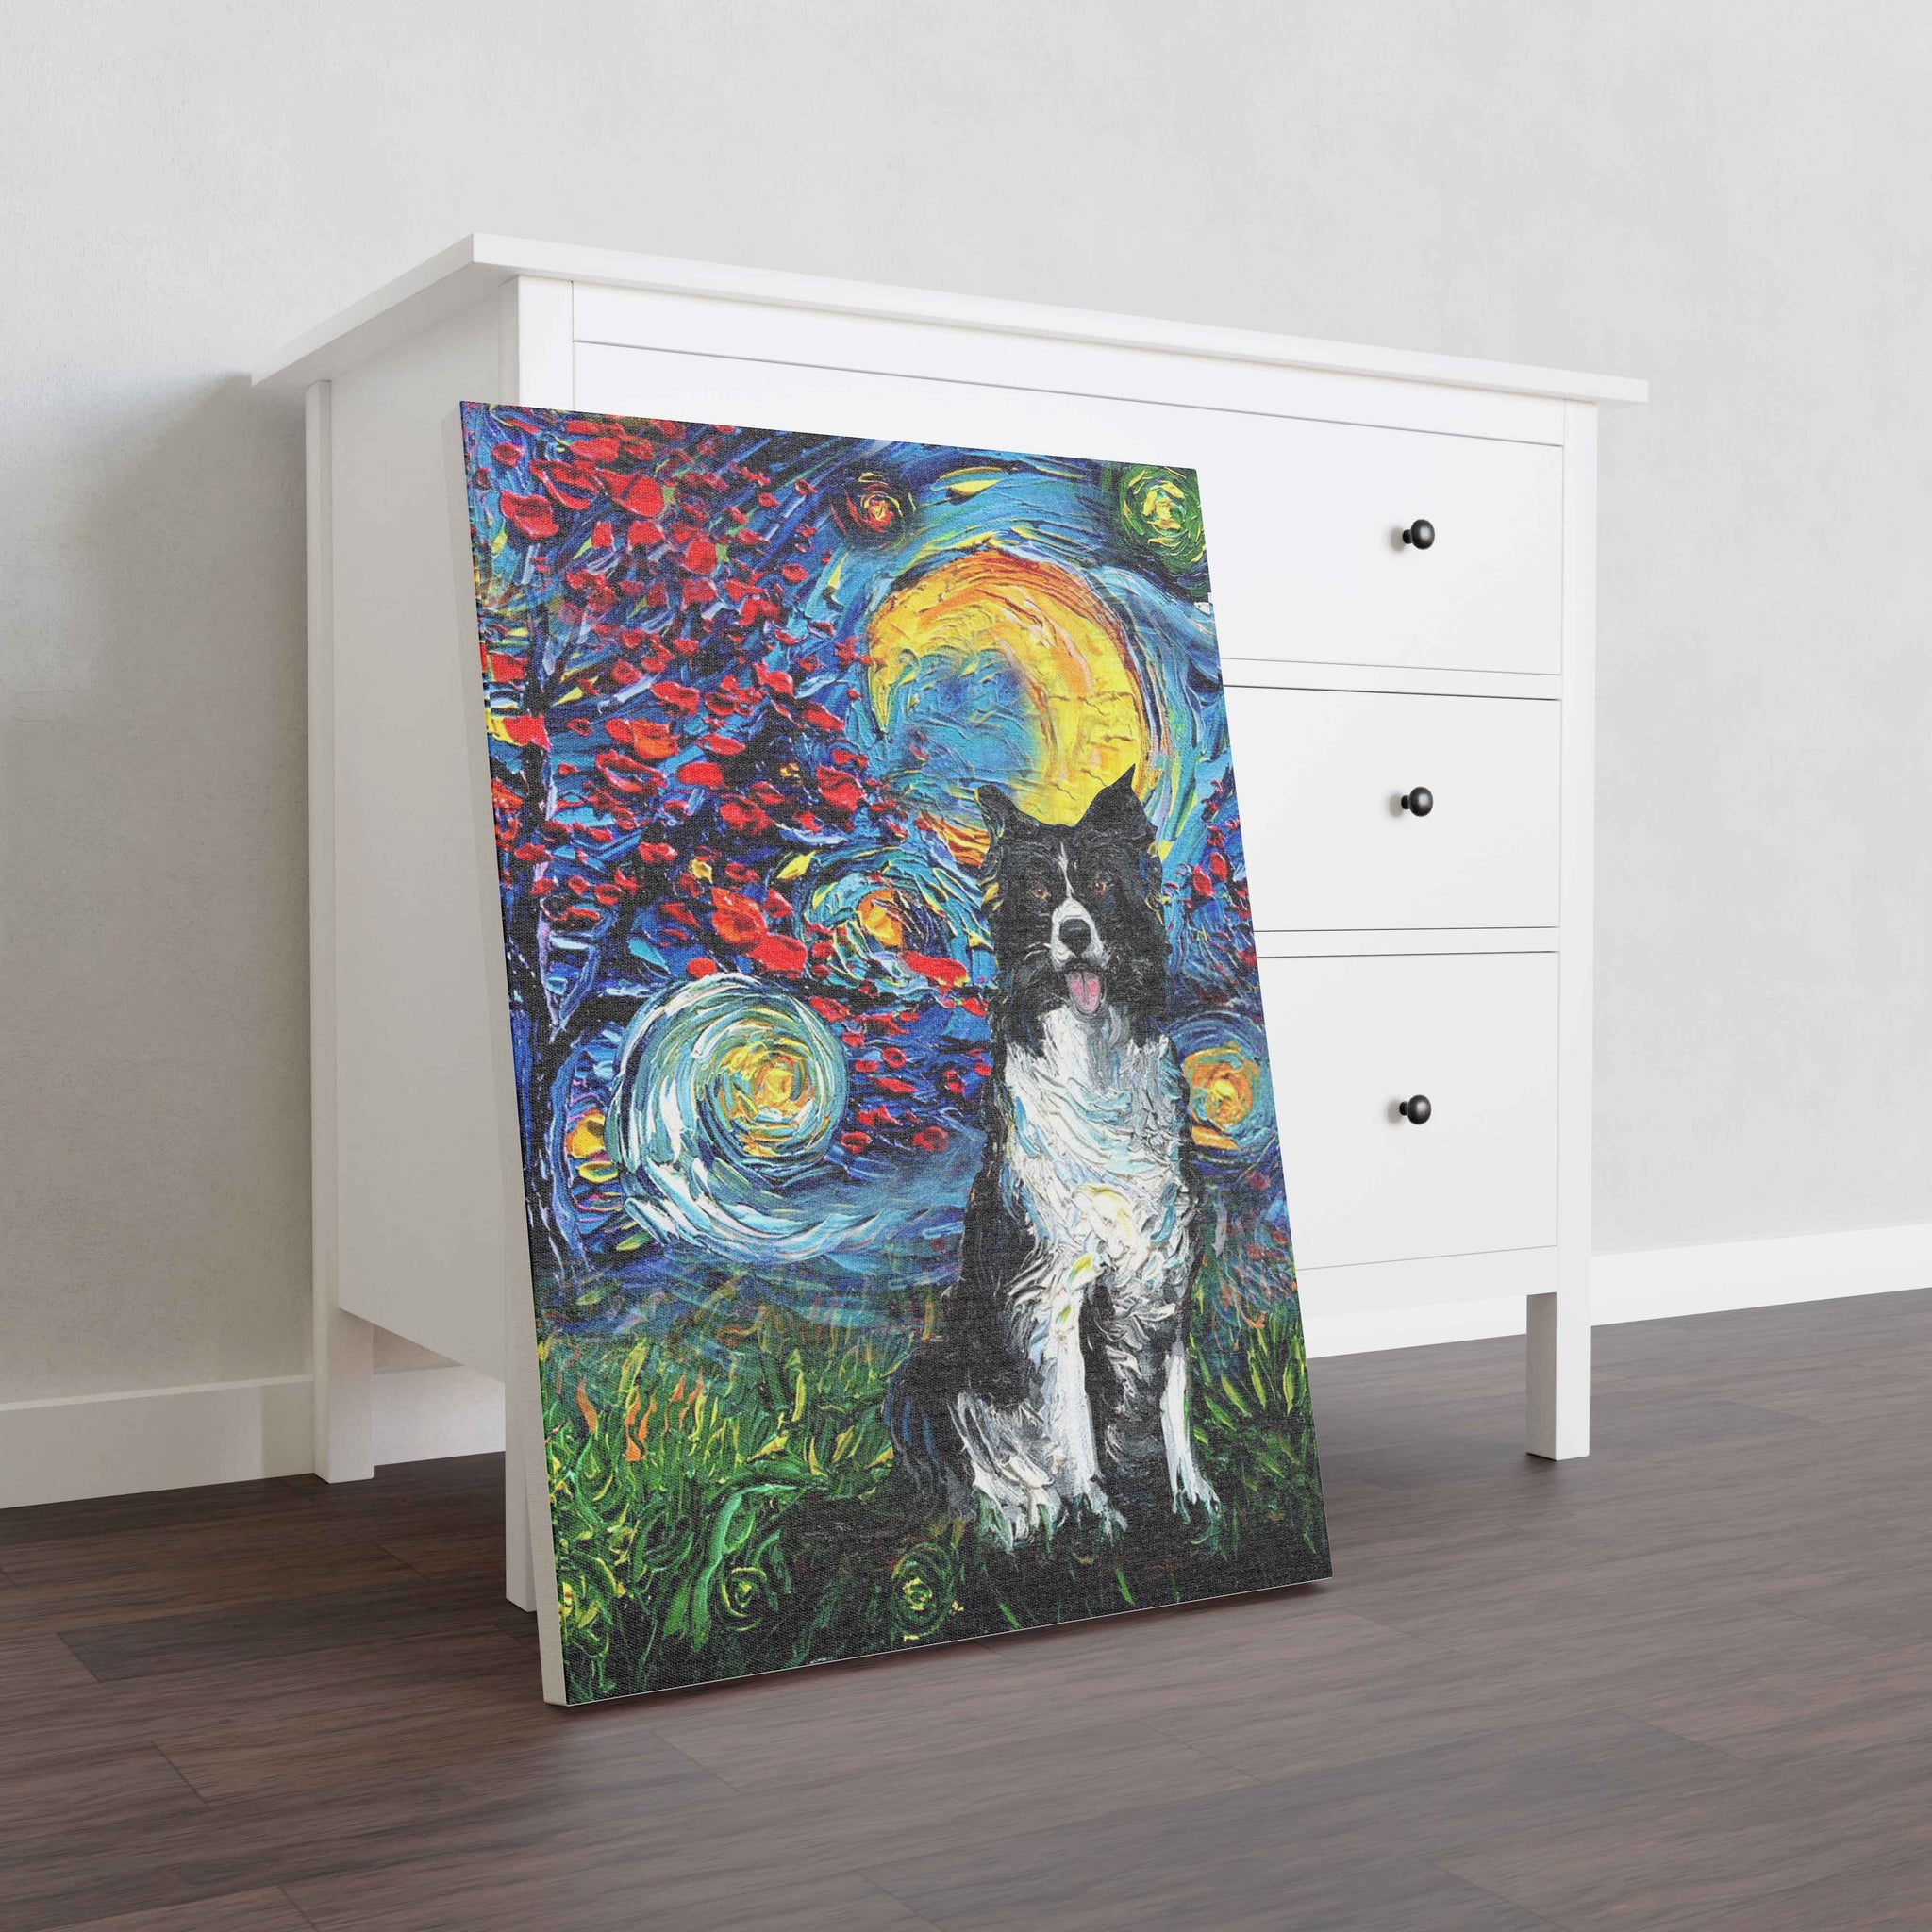 Skitongifts Poster No Frame, Wall Art, Home Decor Border Collie Dog Starry Night Style Halloween-TT1008